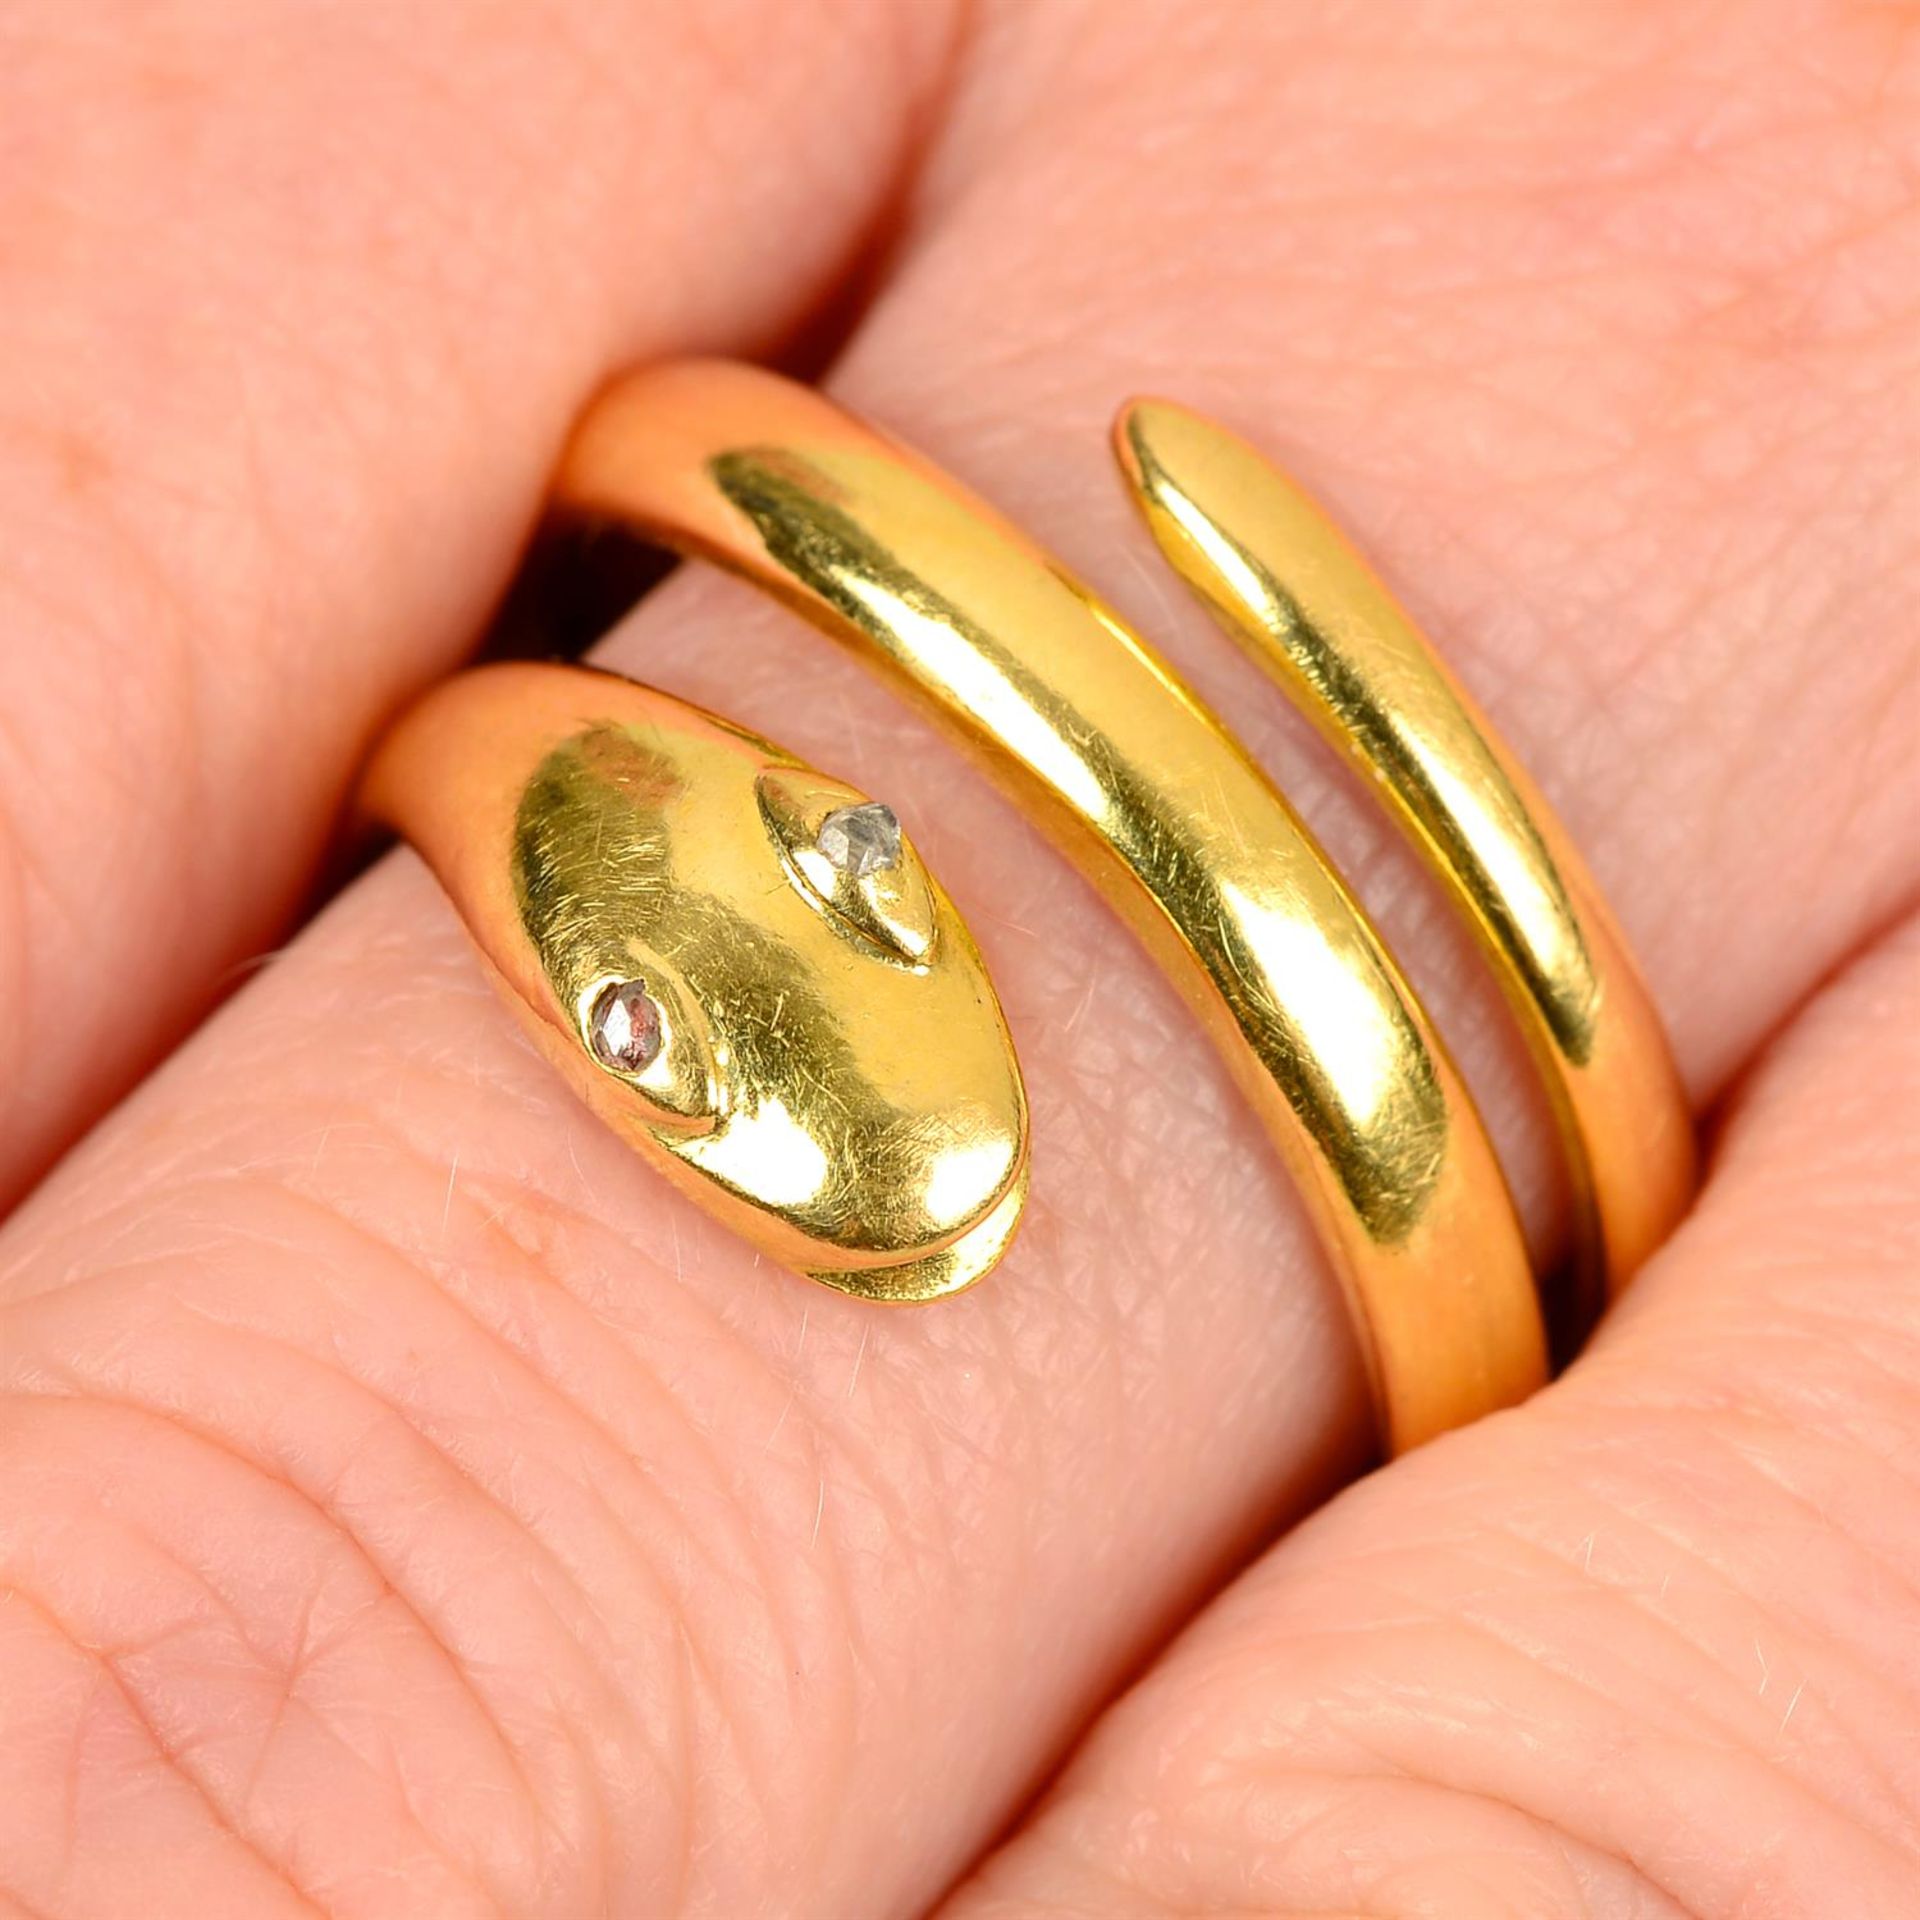 An 18ct gold snake ring, with diamond point eyes.